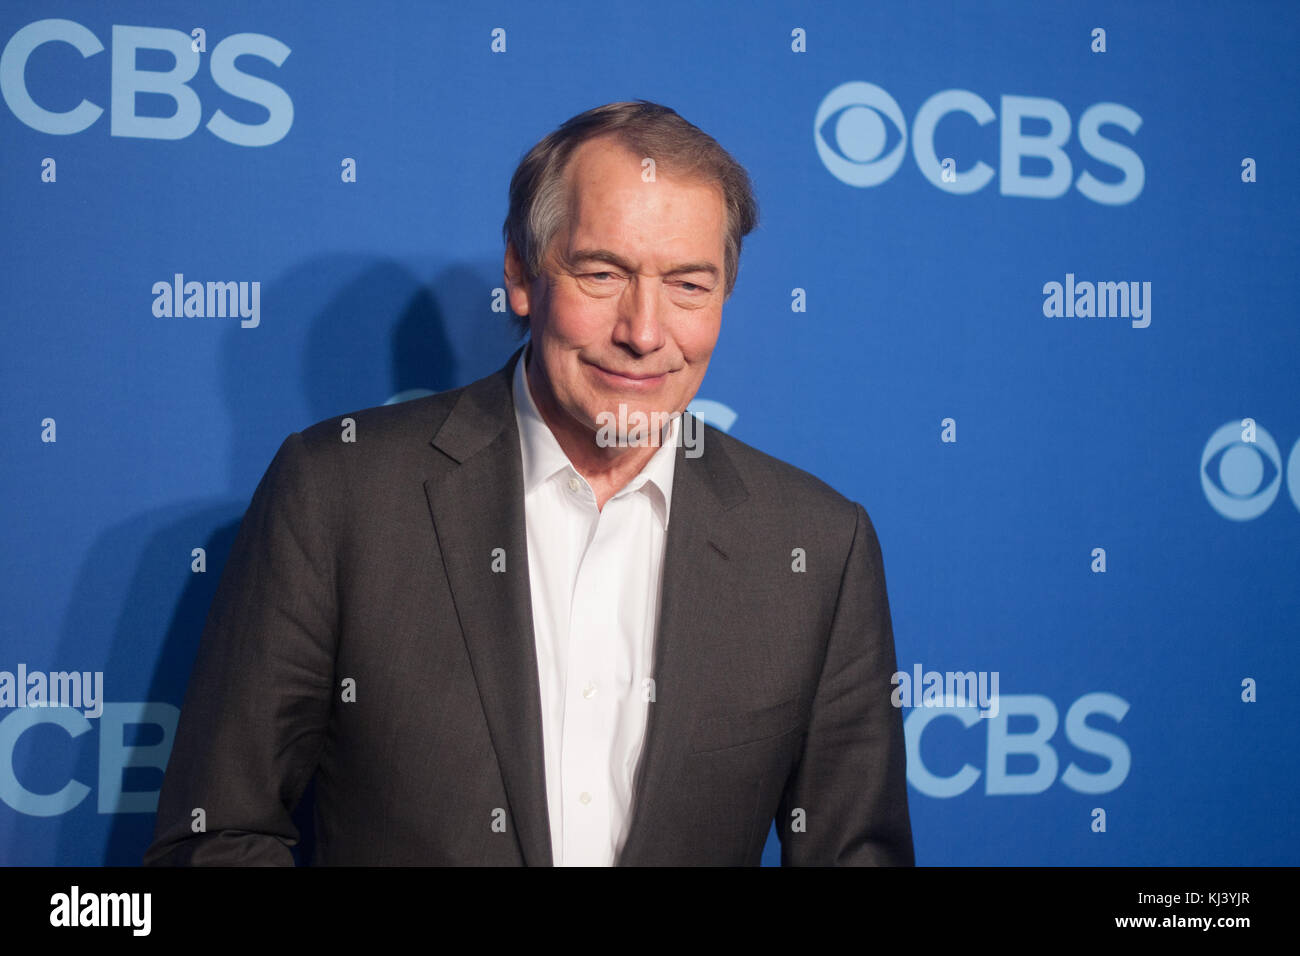 Talk Show Host/journalist Charlie Rose attends the 2013 CBS Upfront at The Tent at Lincoln Center on May 15, 2013 in New York City. Stock Photo